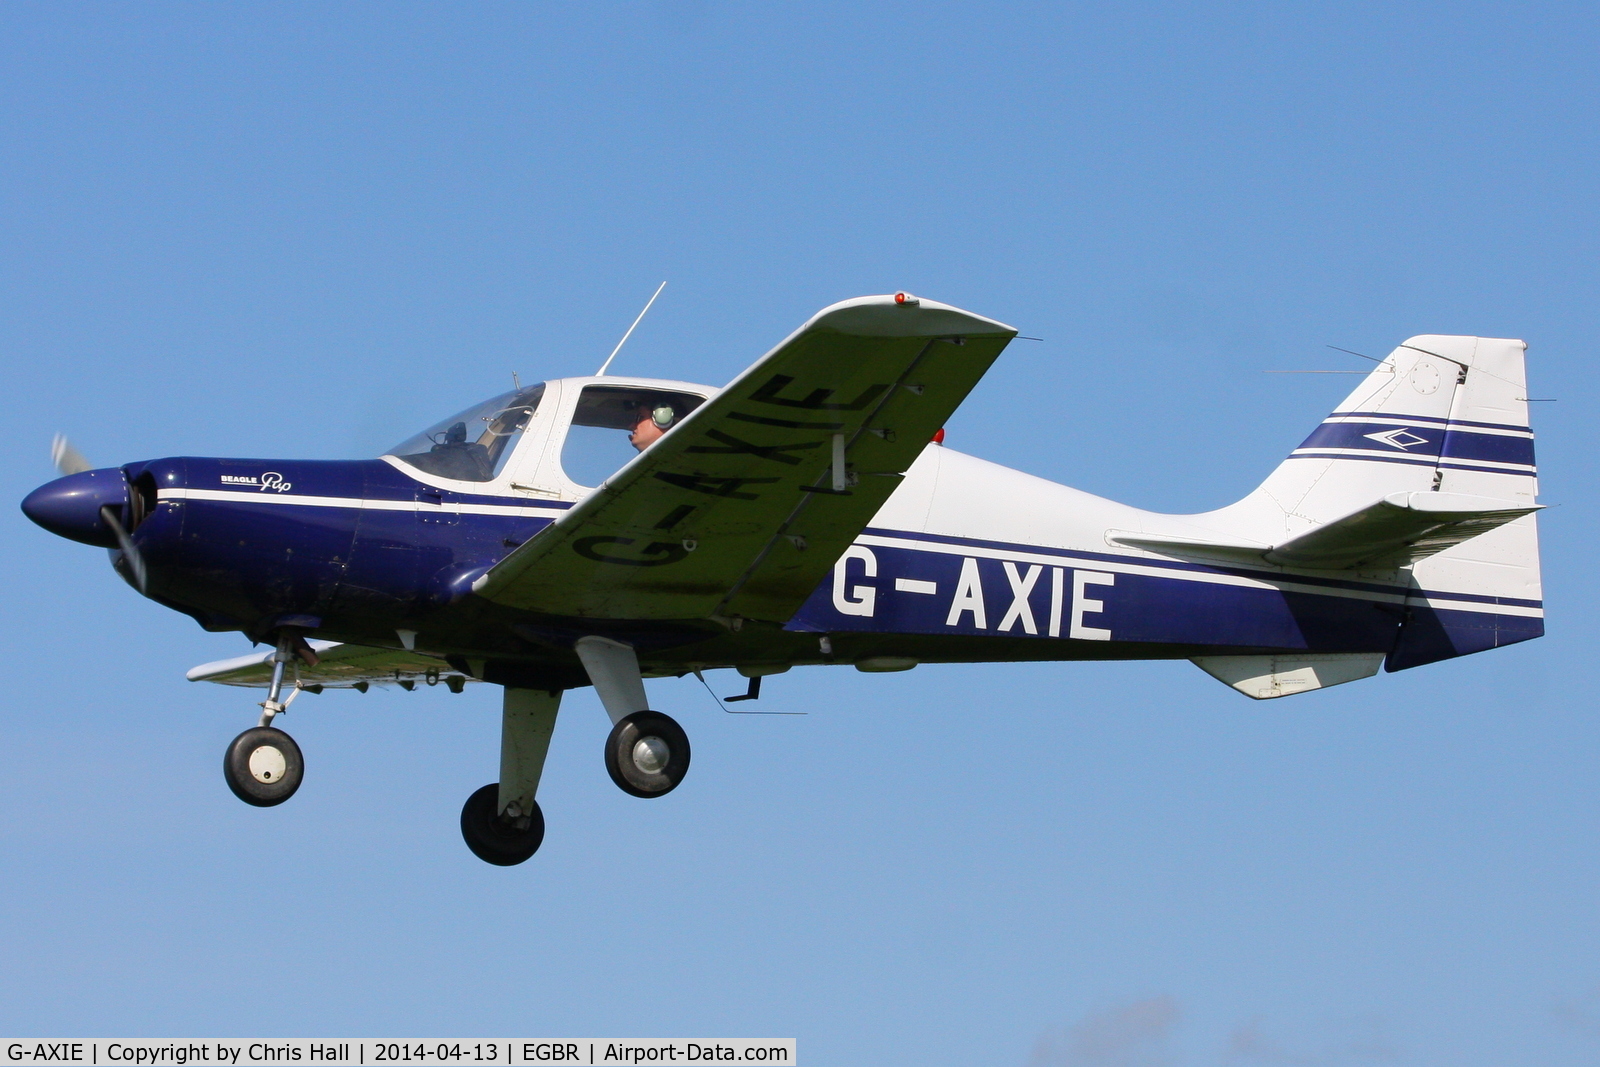 G-AXIE, 1969 Beagle B-121 Pup Series 2 (Pup 150) C/N B121-087, at Breighton's 'Early Bird' Fly-in 13/04/14